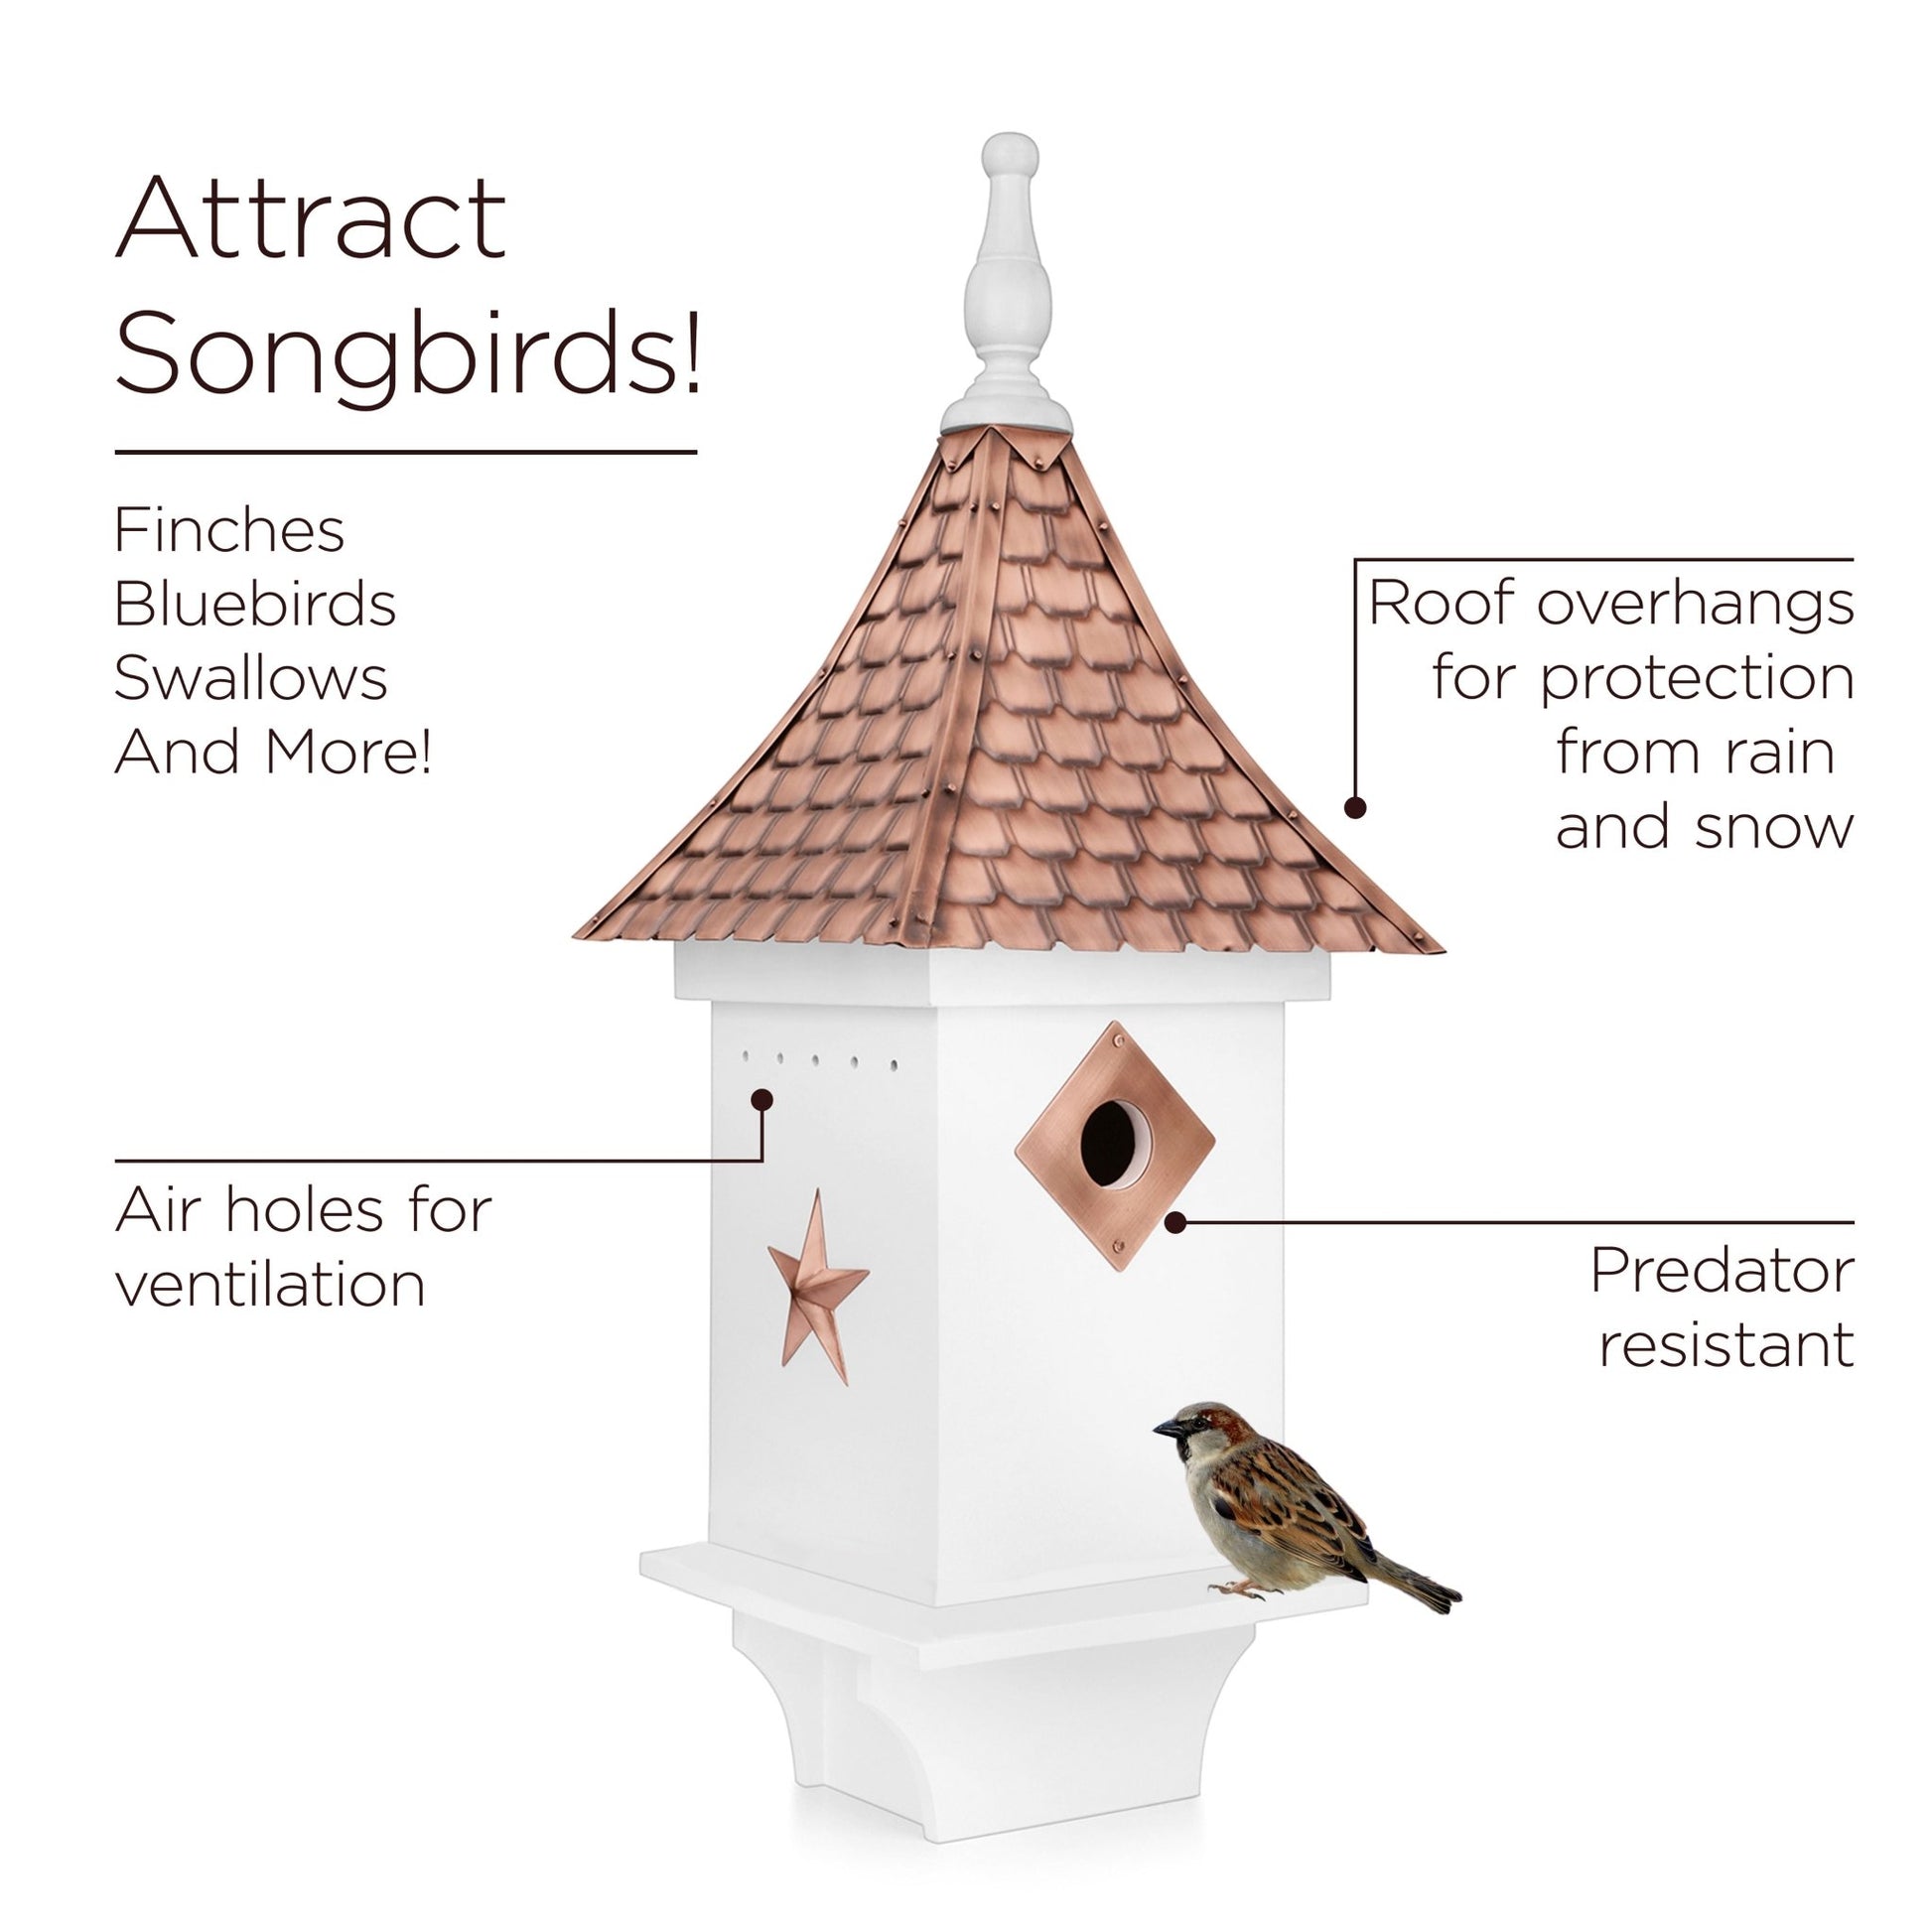 Villa Bird House – White with Roof - Good Directions